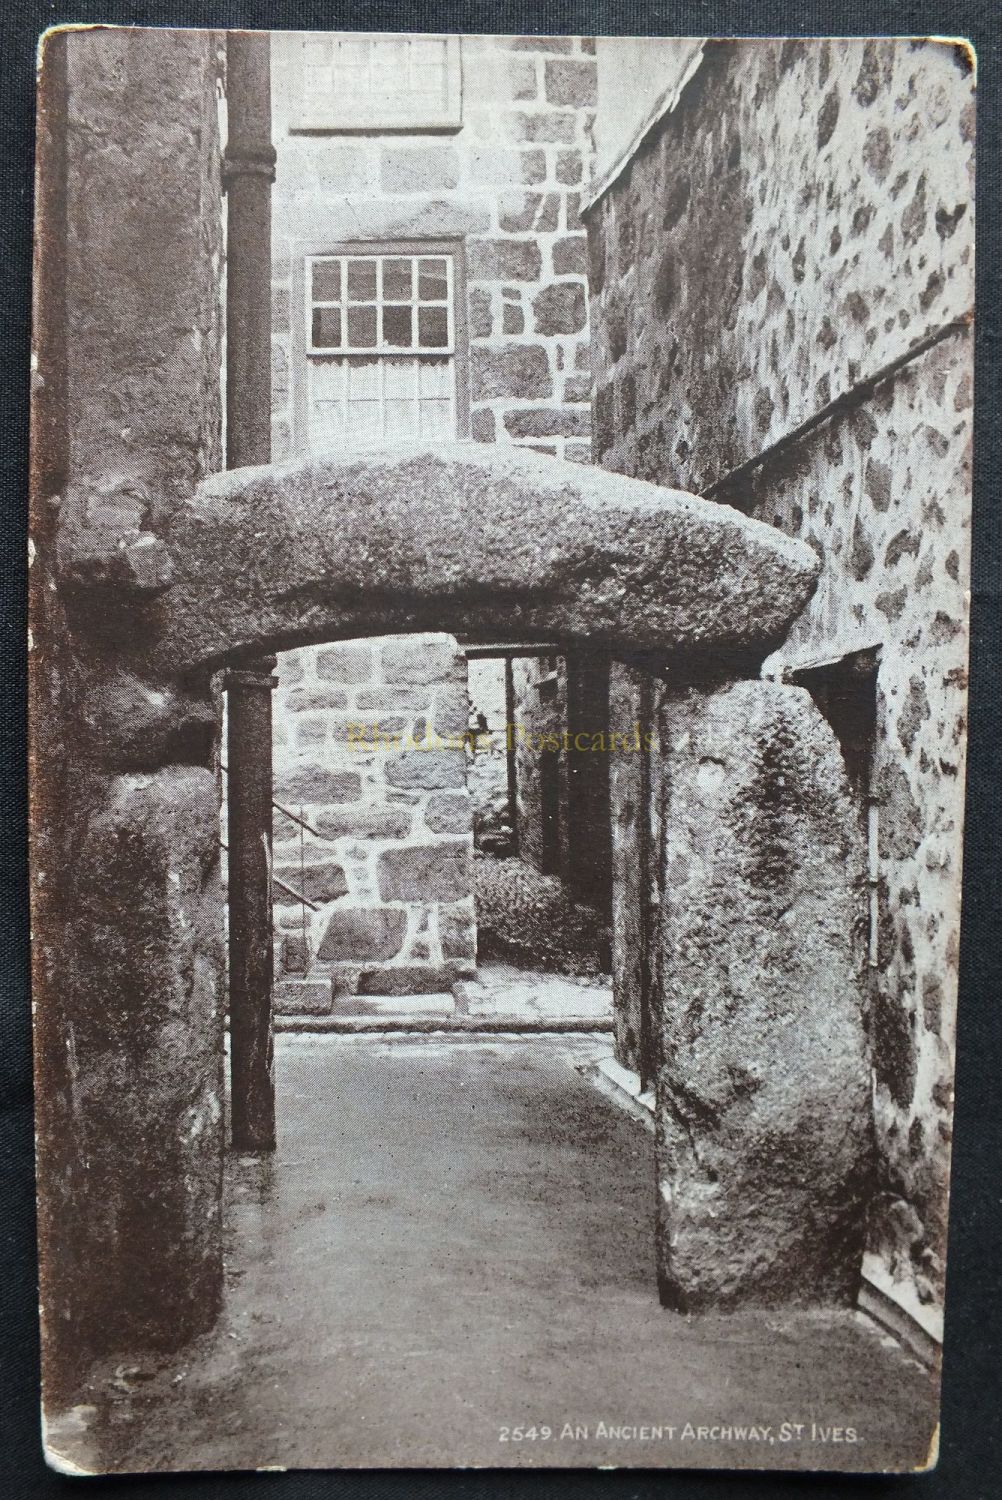 Cornwall - Ancient Archway, St Ives - Early 1900s J Salmon Sepio Series Pos